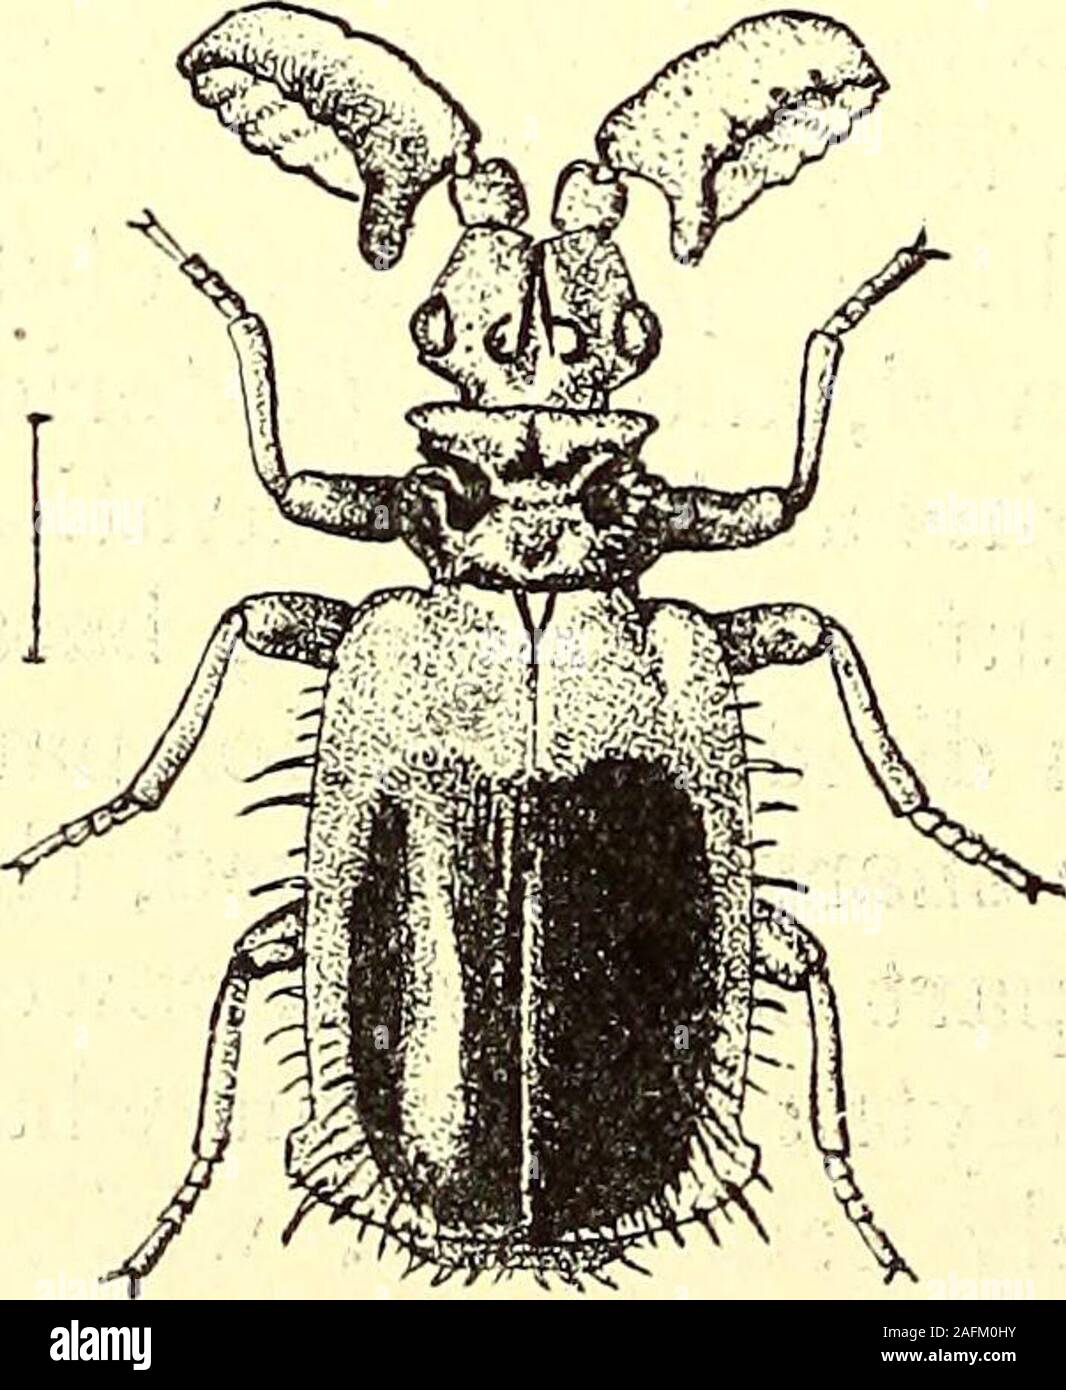 . Coleoptera : general introduction and Cicindelidae and Paussidae. elytra dull, finely rugose, with very faint traces of raisedlines, with the apical follicles well marked, but without a brush ofhairs or a thorn-like seta; legs rather broad, tibiae compressed,,the posterior pair somewhat curved and rather broader than theothers. Length 6 millim. India. 261. Paussus jerdani, Westw. Paussus jerdani, Westwood, Trans. Ent. Soc. Lond. v, 1847, p. 26,.pi. 2, tip. 1; id., Cab. Orient. Ent. pi. 41, fig. 5 j id., Thes. Ent.Oxon. 1874, p. 88, pi. 18, fig. 4. Of a dull rufous or rufo-castaneouscolour, w Stock Photo